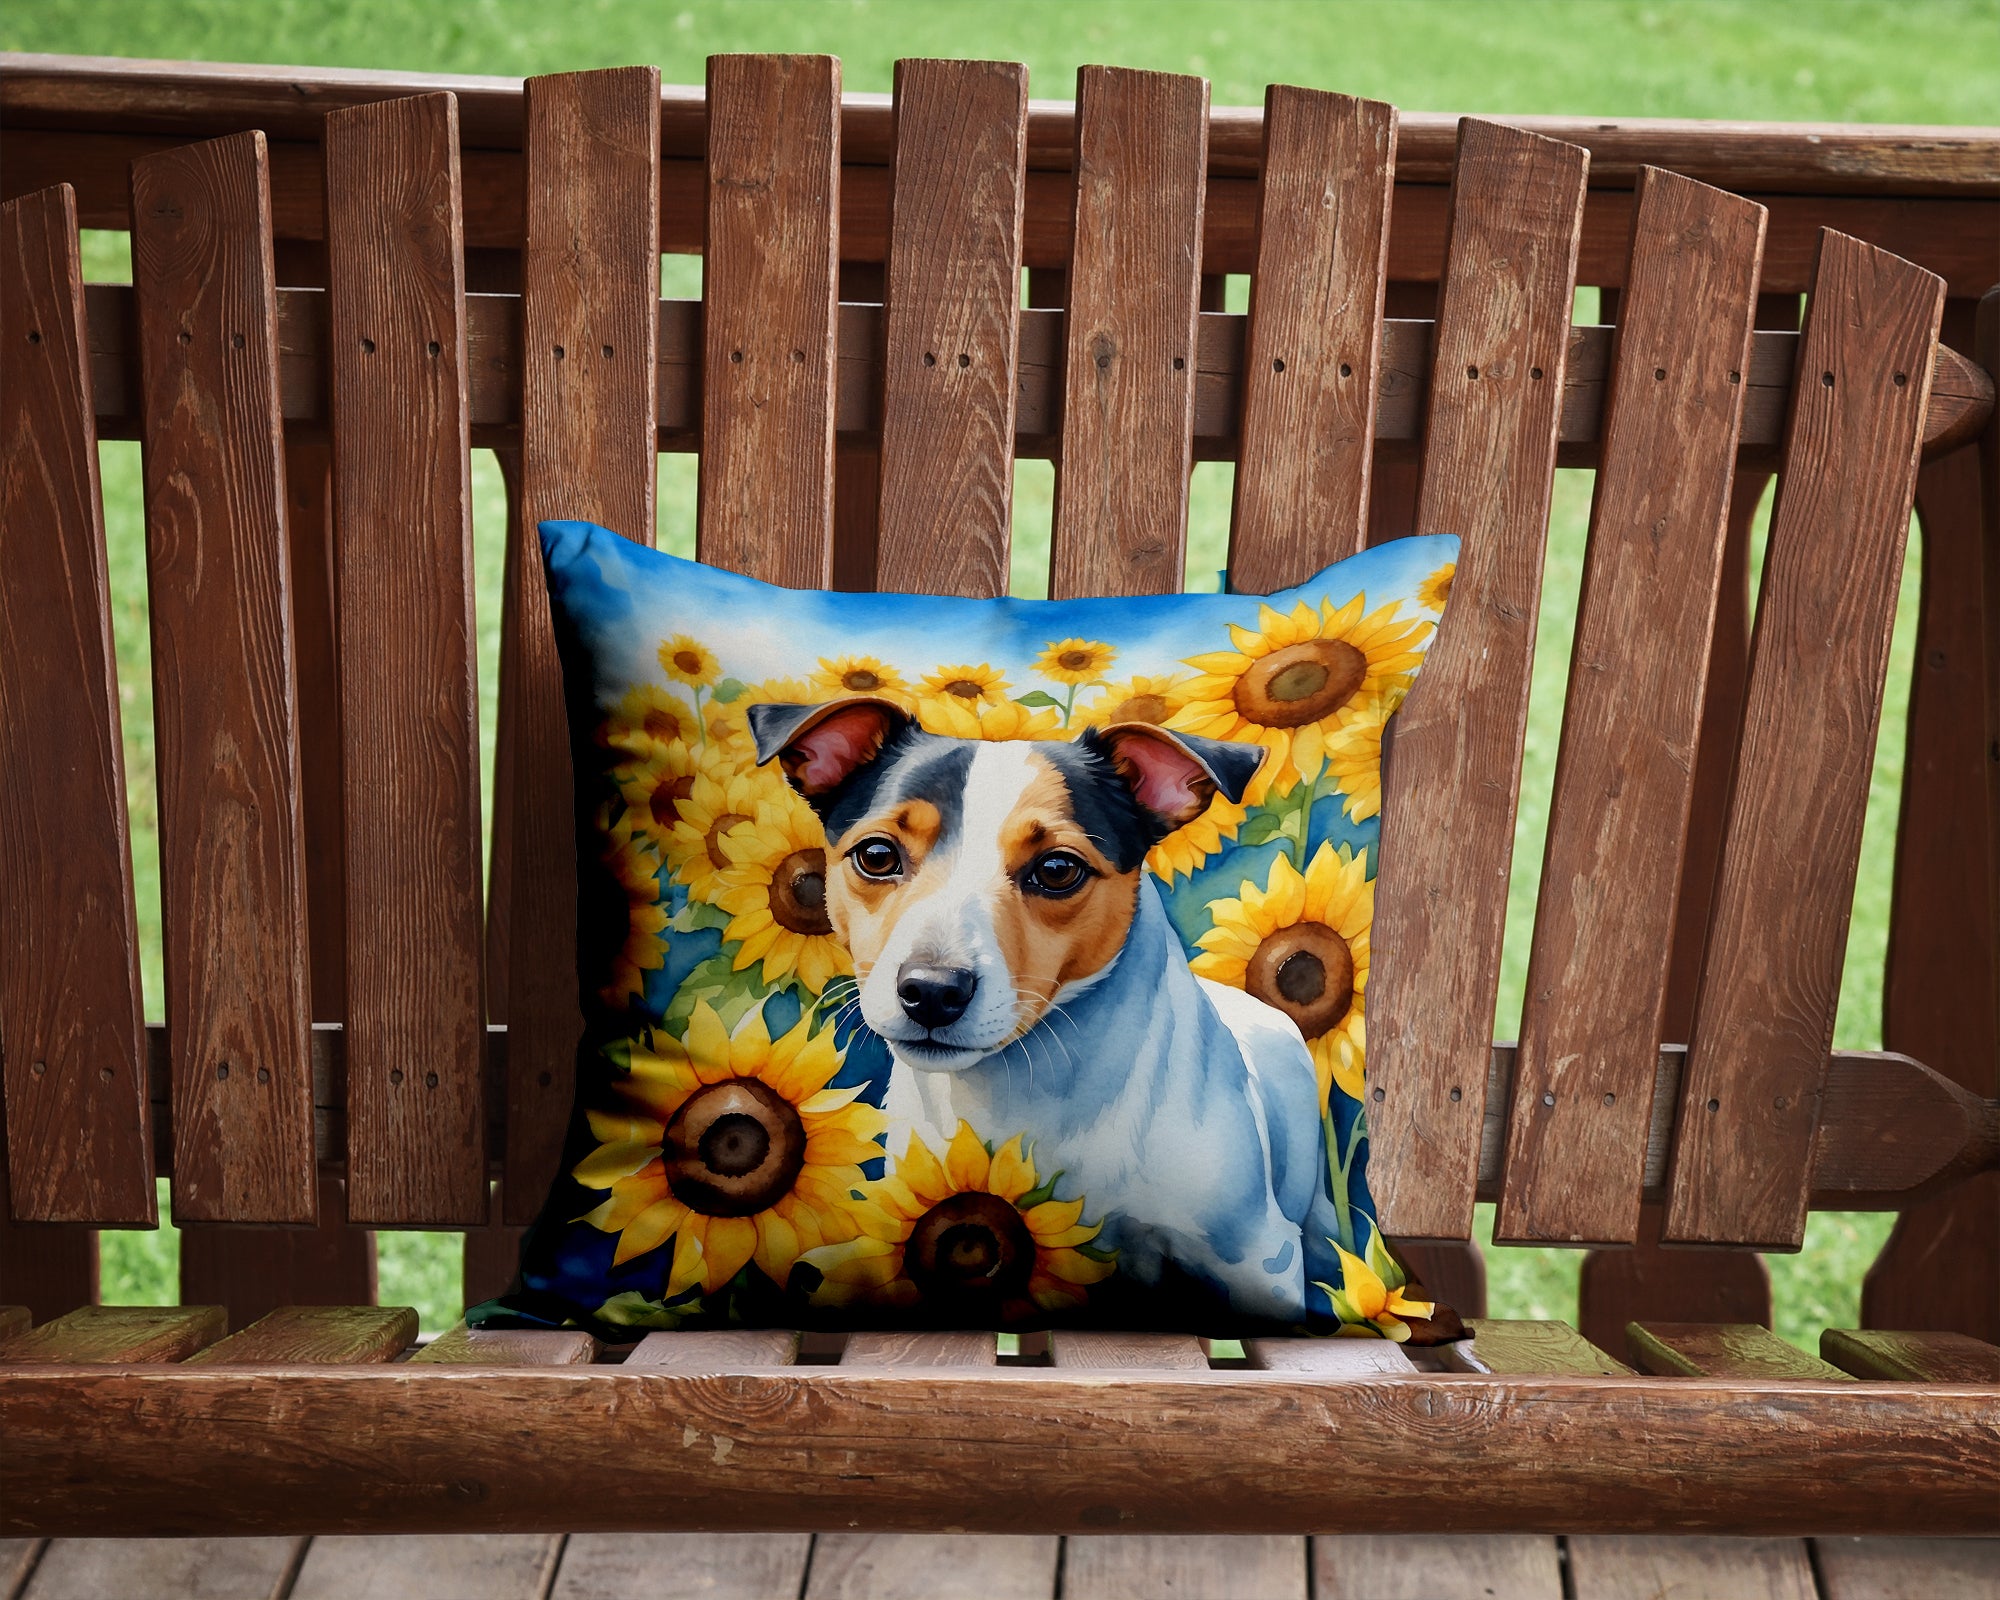 Buy this Jack Russell Terrier in Sunflowers Throw Pillow